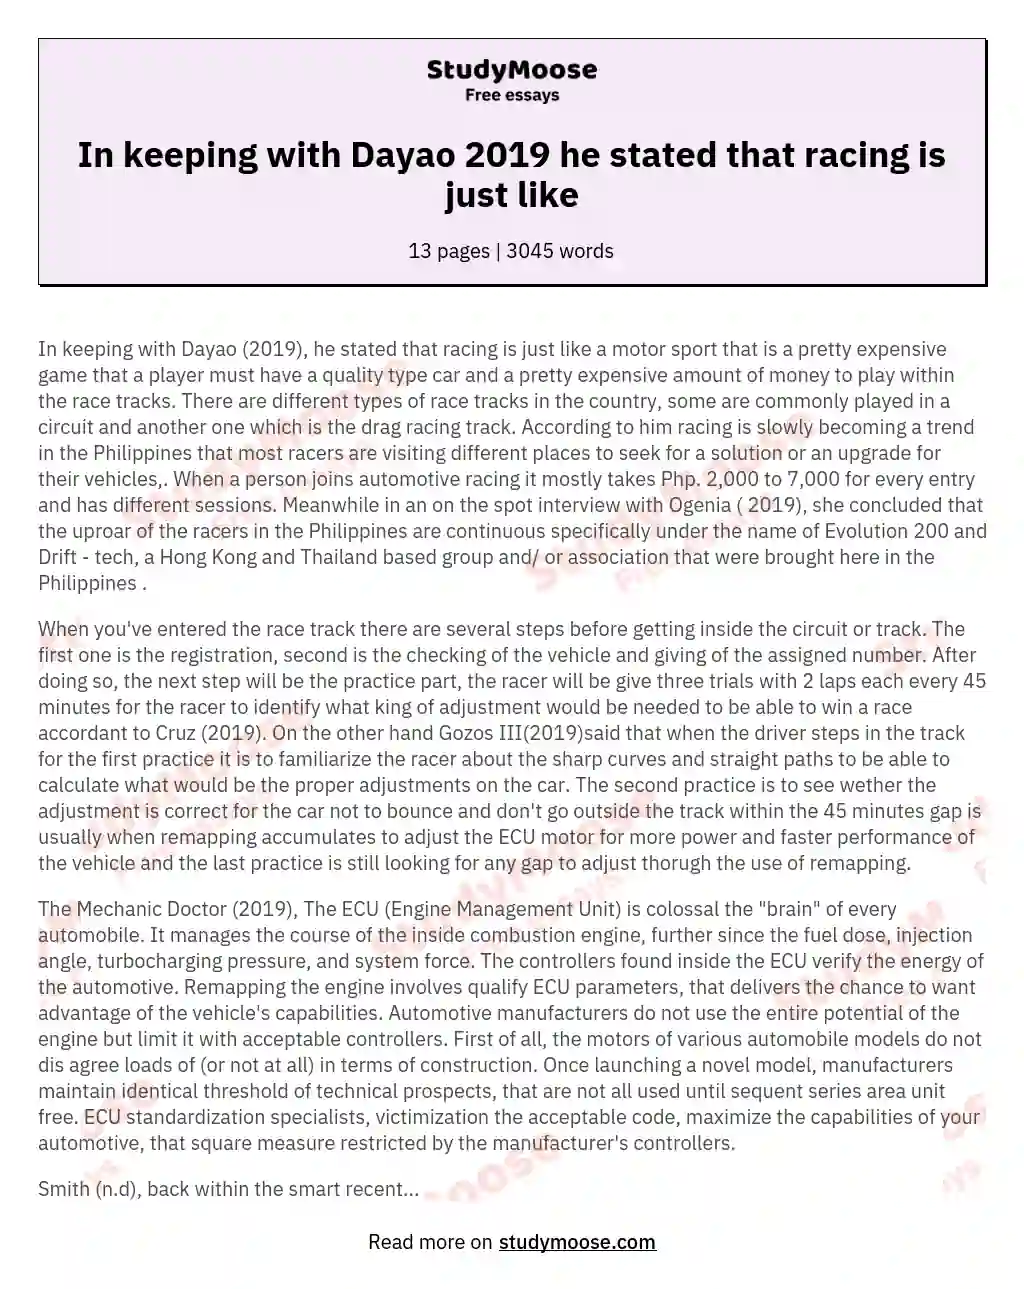 In keeping with Dayao 2019 he stated that racing is just like essay